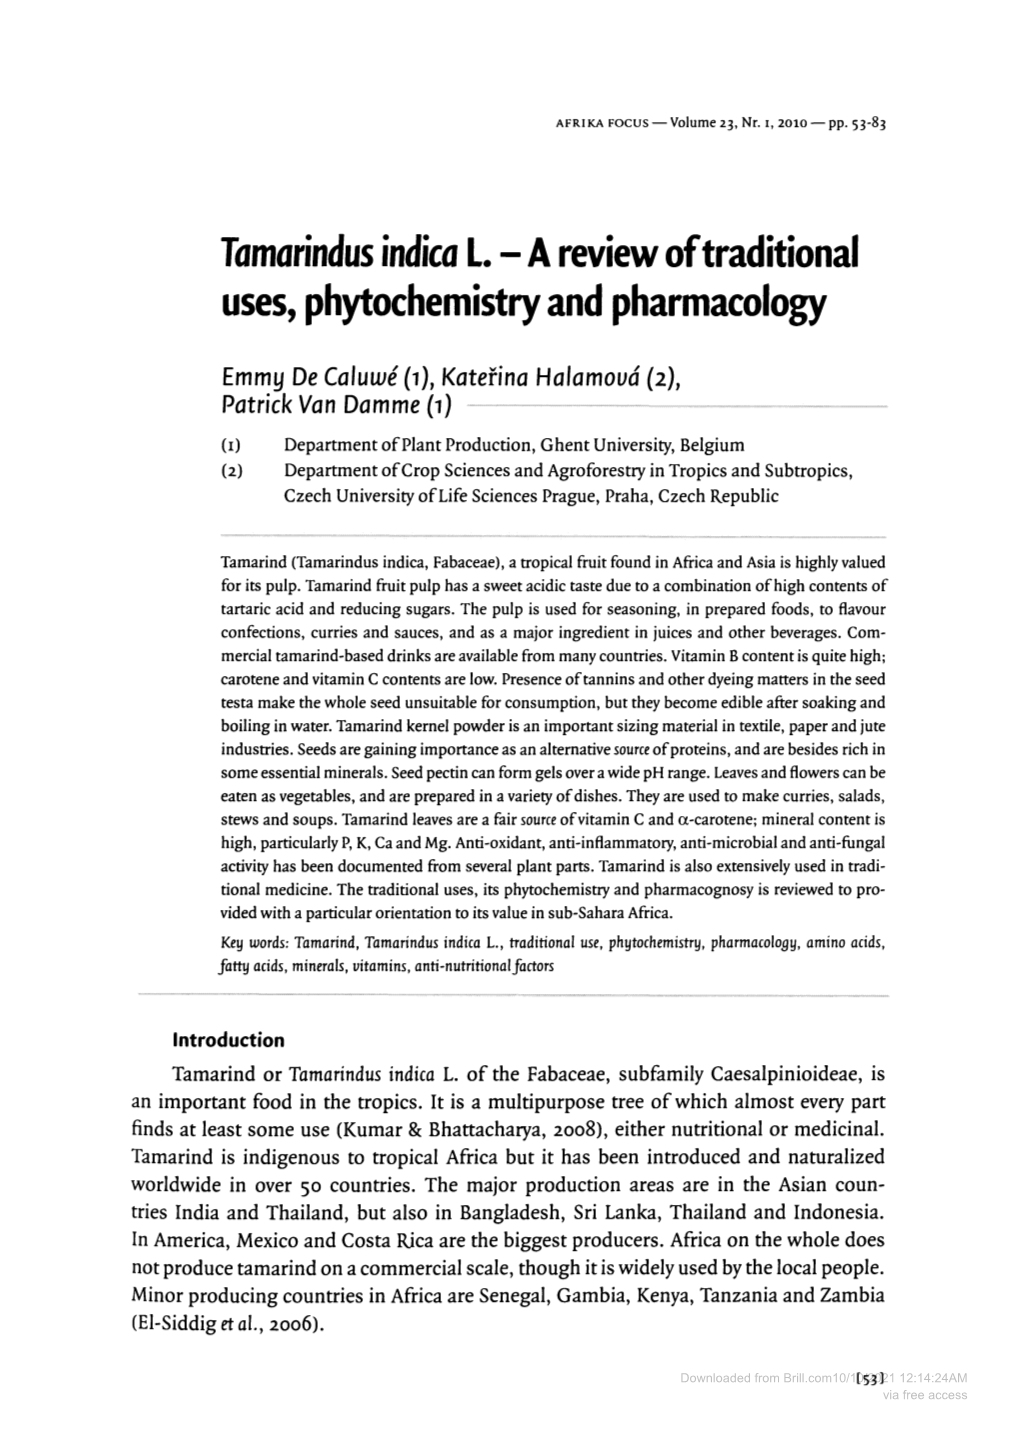 Tamarindus Indica L. - a Review of Traditional Uses, Phytochemistry and Pharmacology